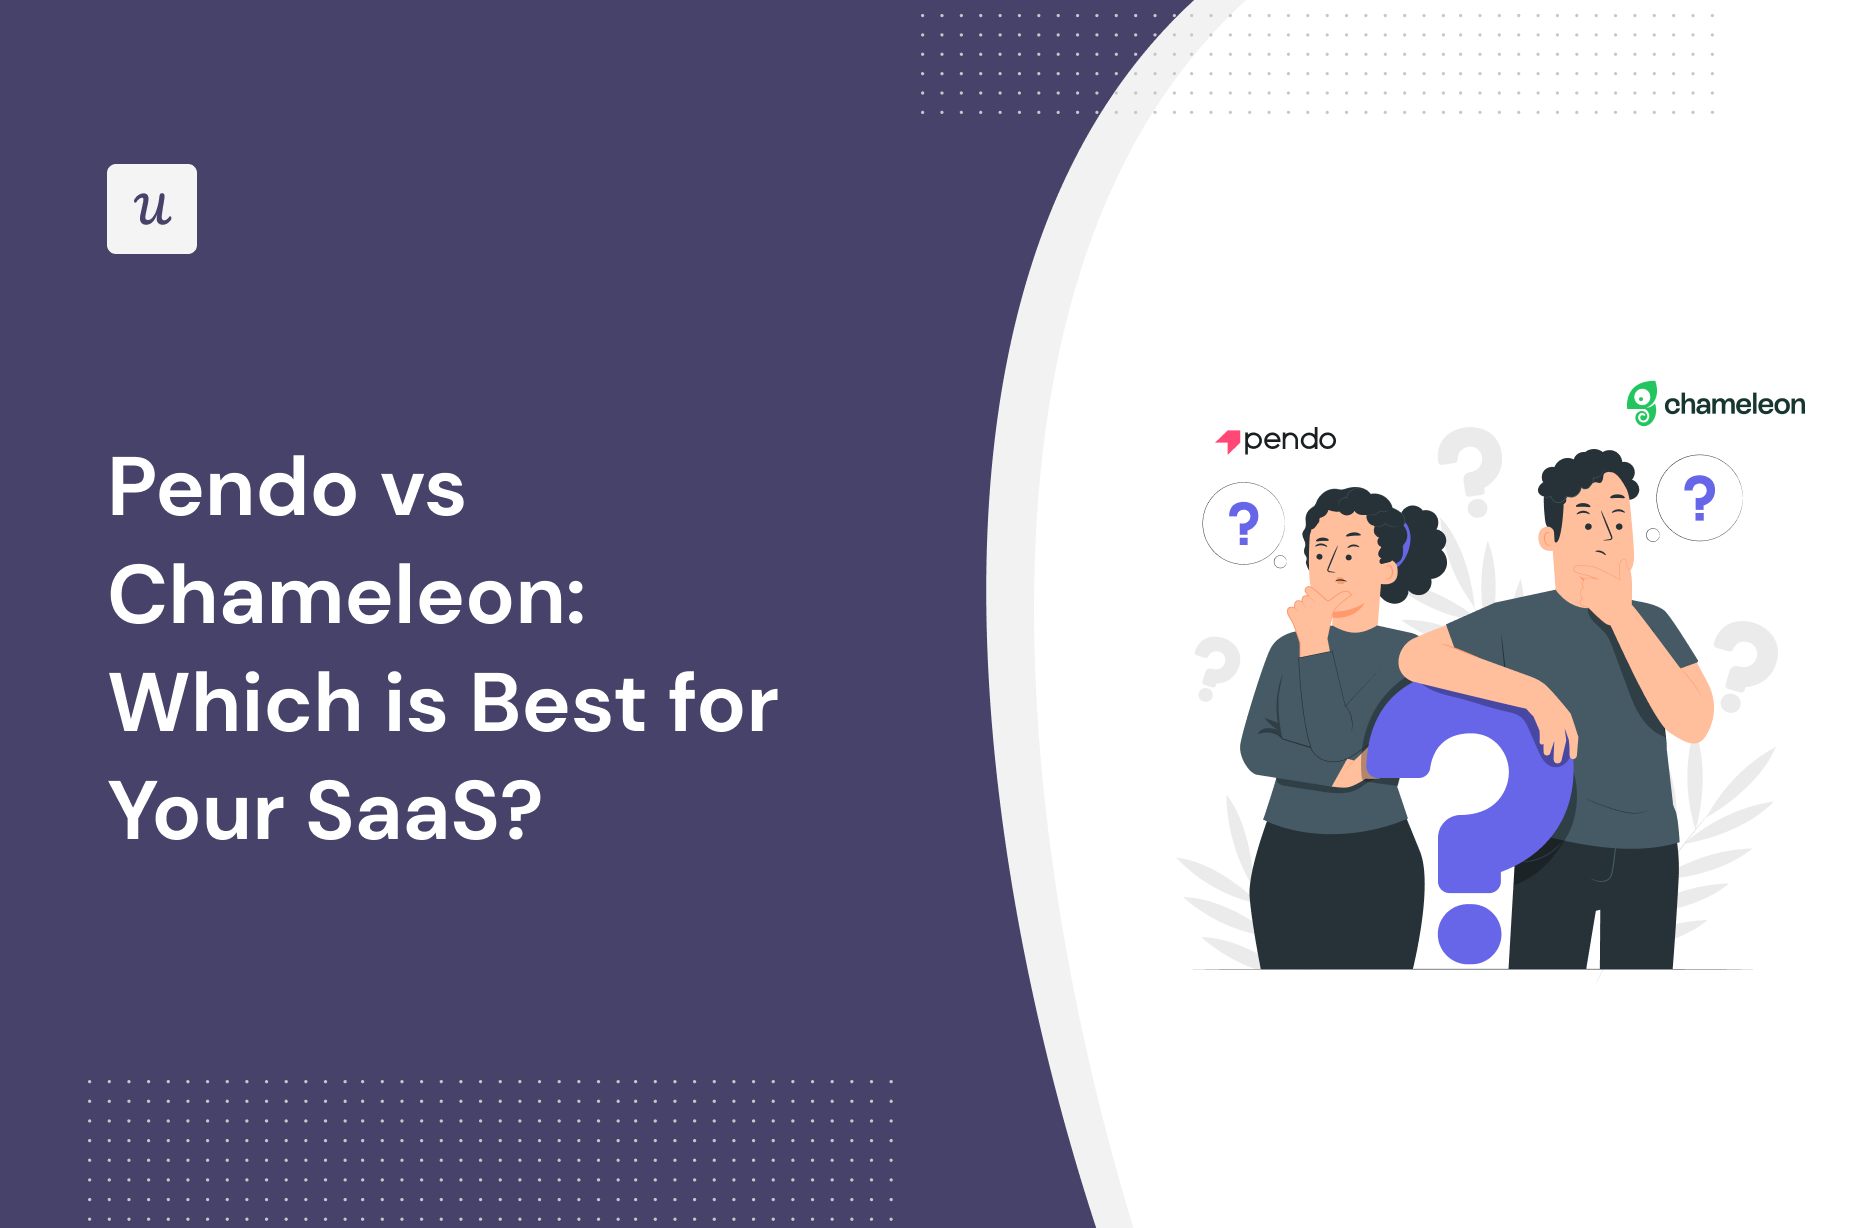 Pendo vs Chameleon: Which is Best for Your SaaS?